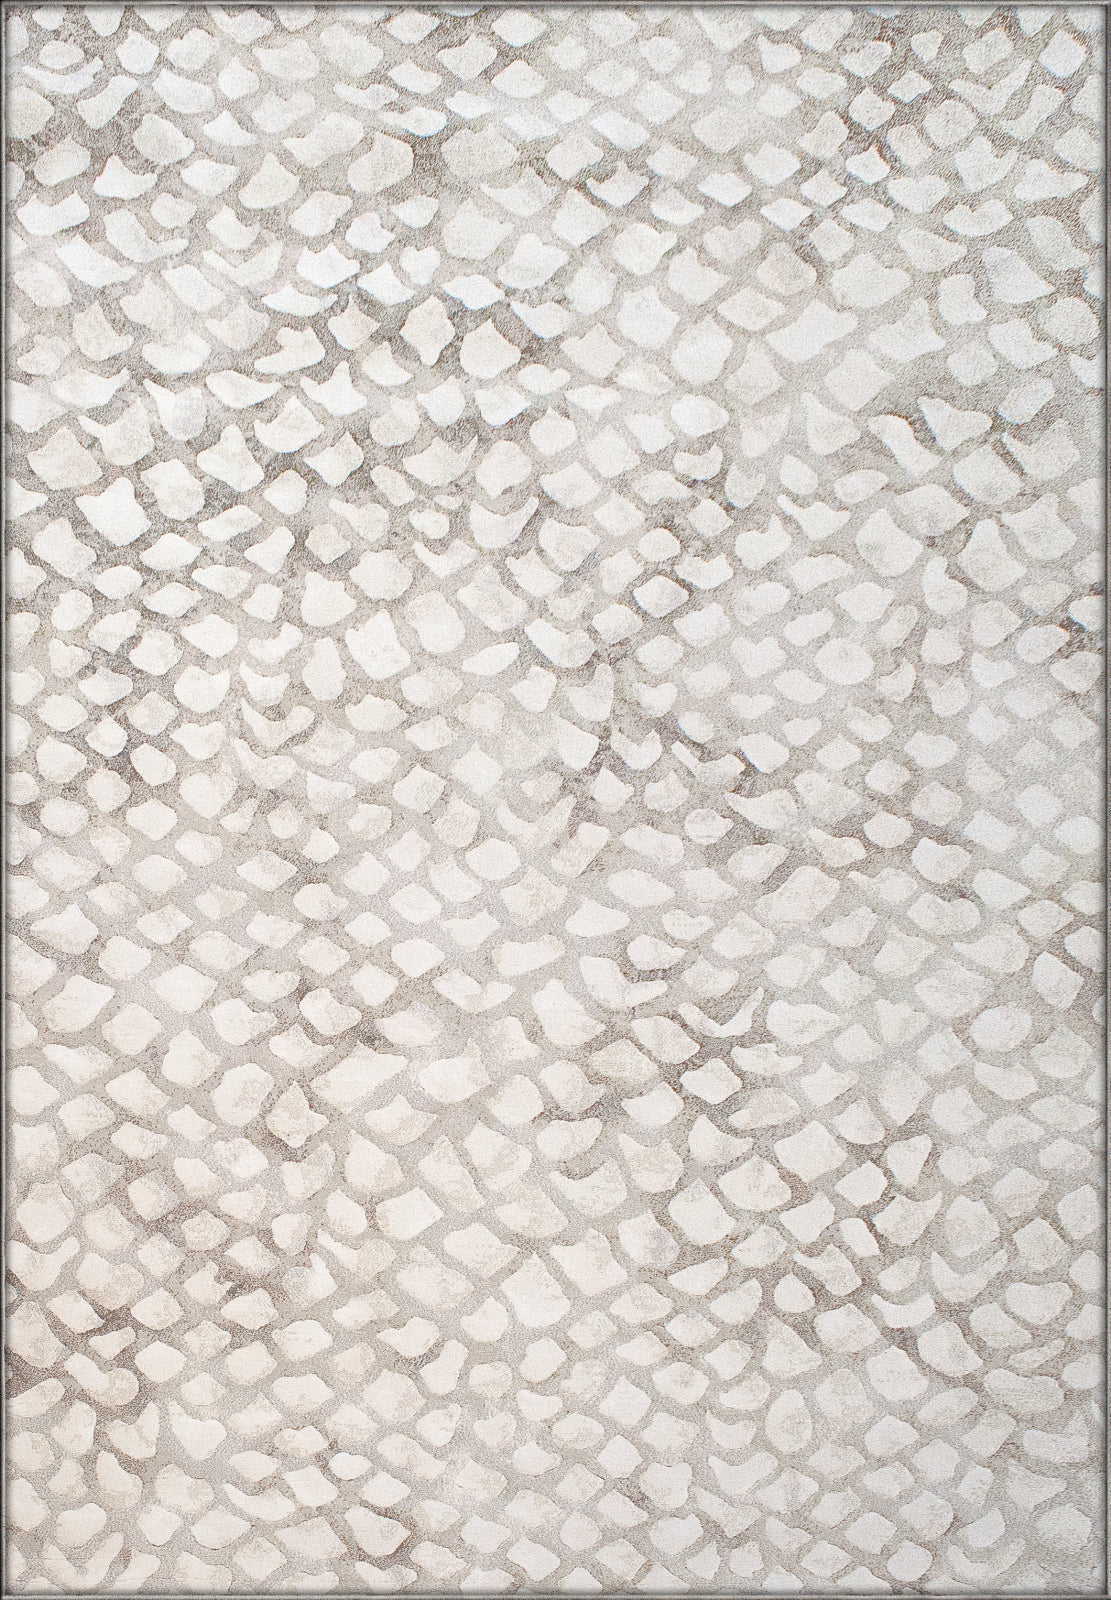 Dynamic Rugs Eclipse 64194 Ivory Area Rug main image